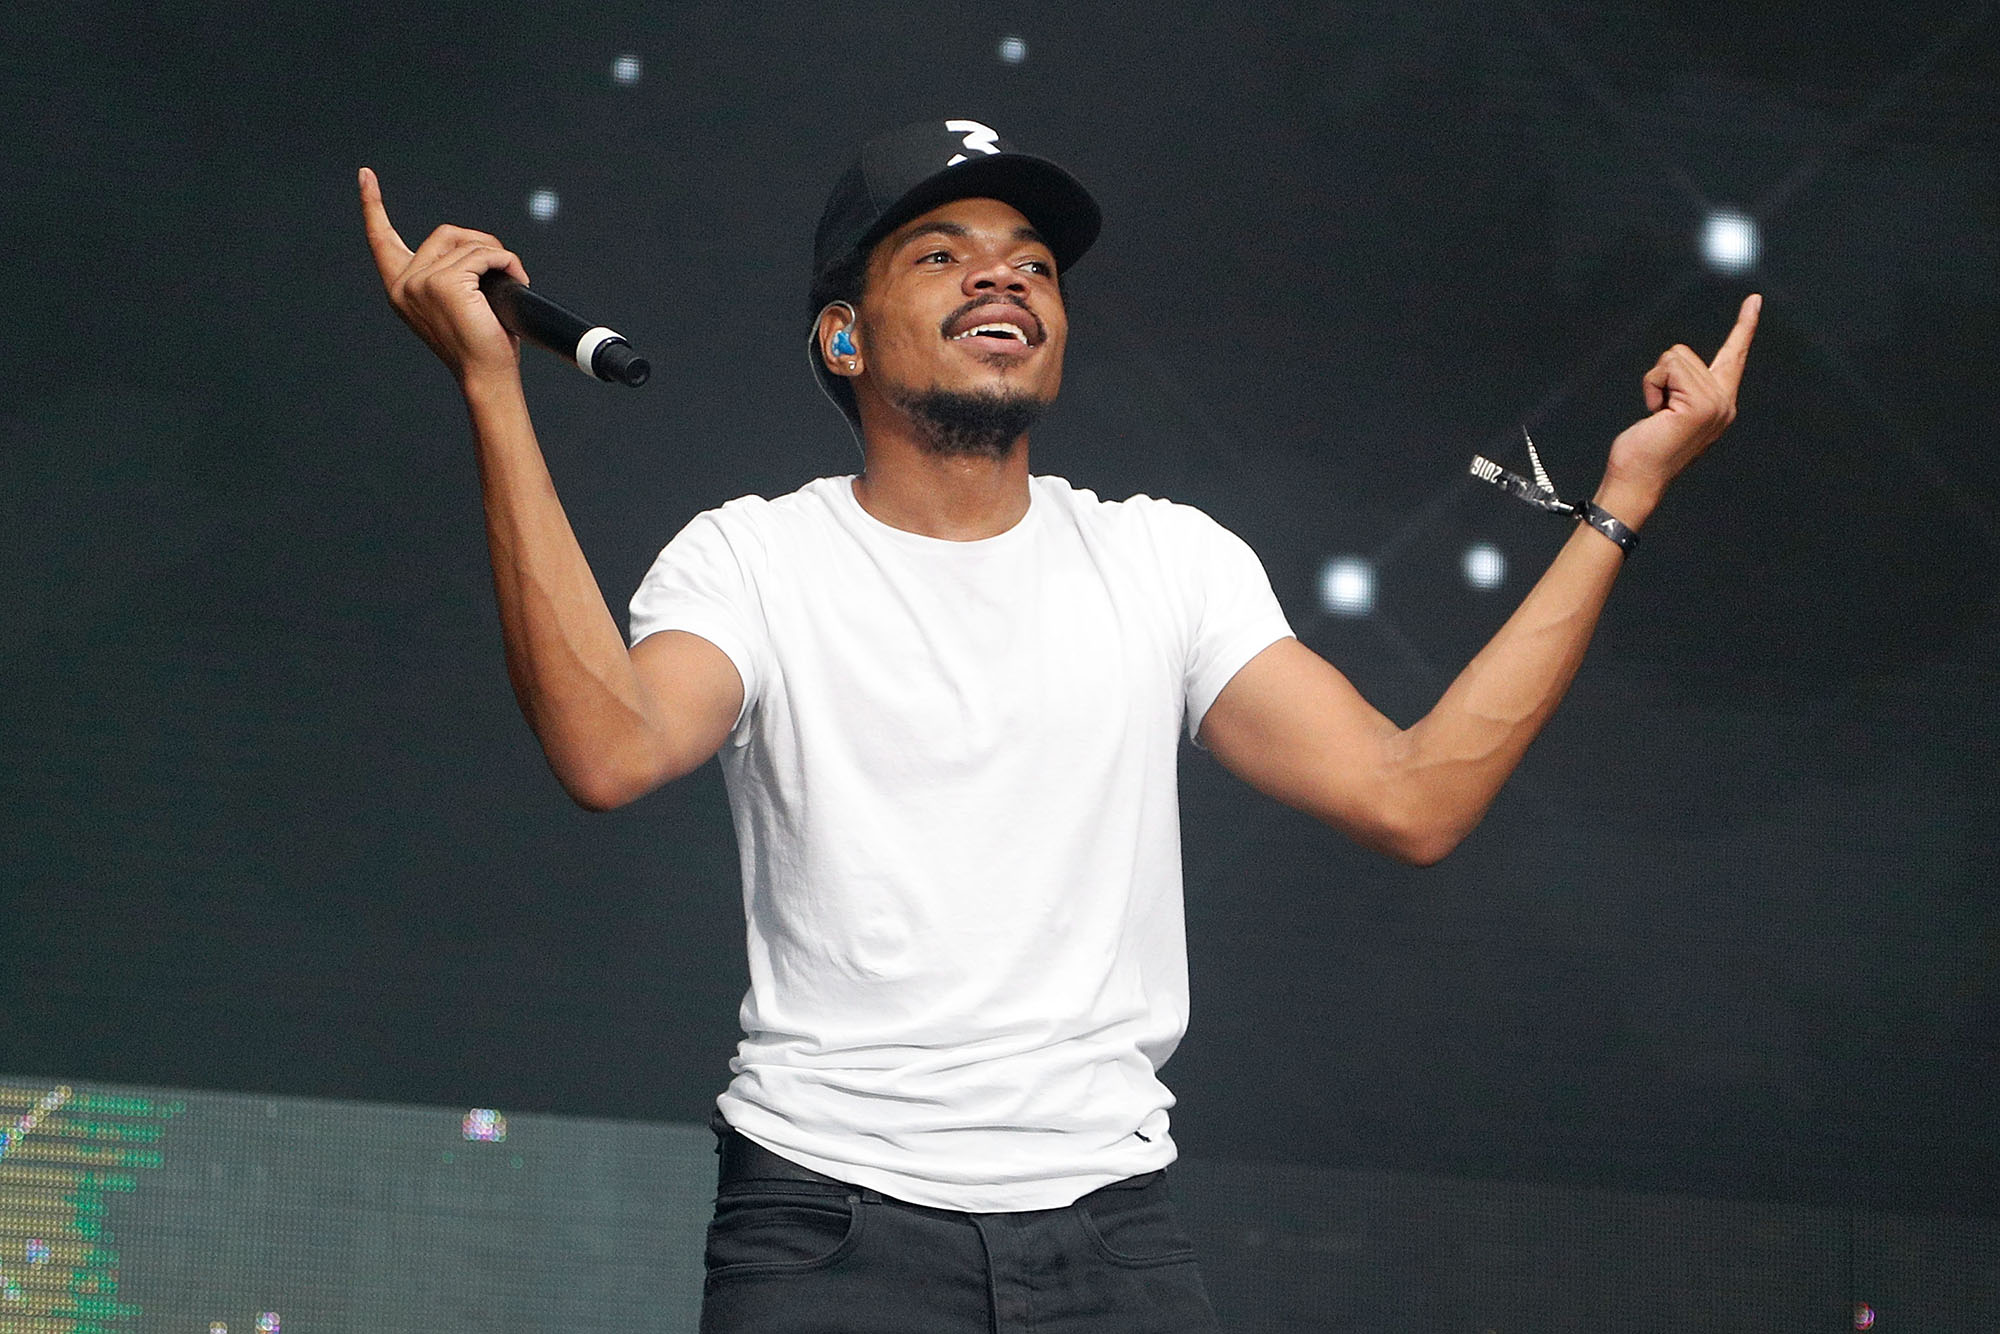 Chance the Rapper performs during the 2016 The Meadows Music &amp; Arts Festival at Citi Field on October 2, 2016 in Queens, New York.  (Photo by Taylor Hill/Getty Images for The Meadows) (Taylor Hill&mdash;Getty Images for The Meadows)